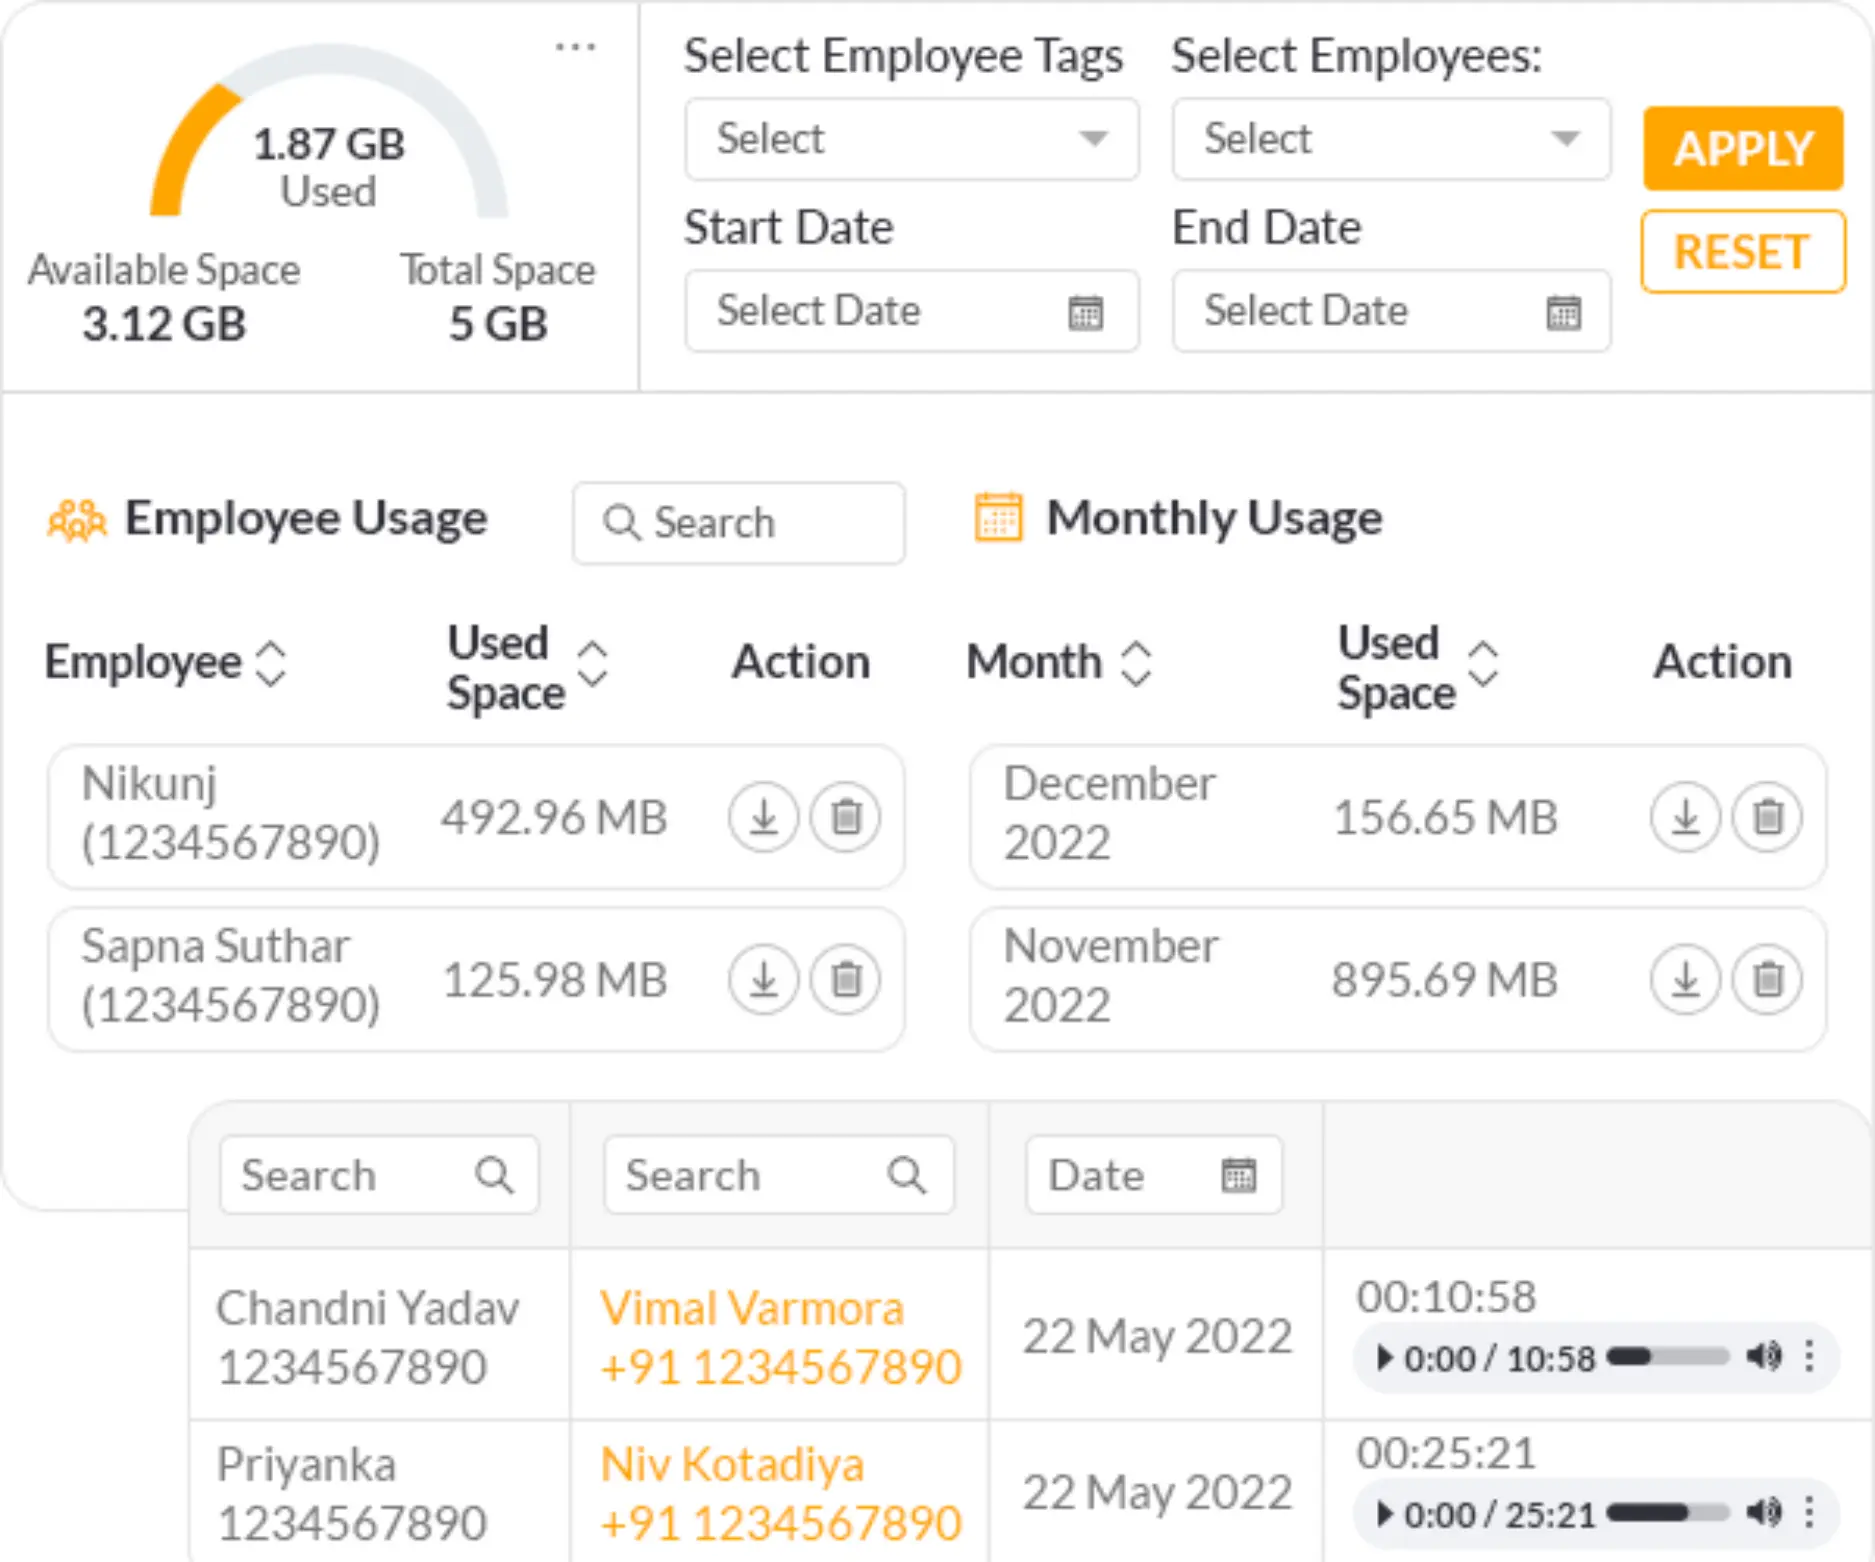 Screenshot of a call management software interface showing employee data usage statistics, selection filters, and action buttons